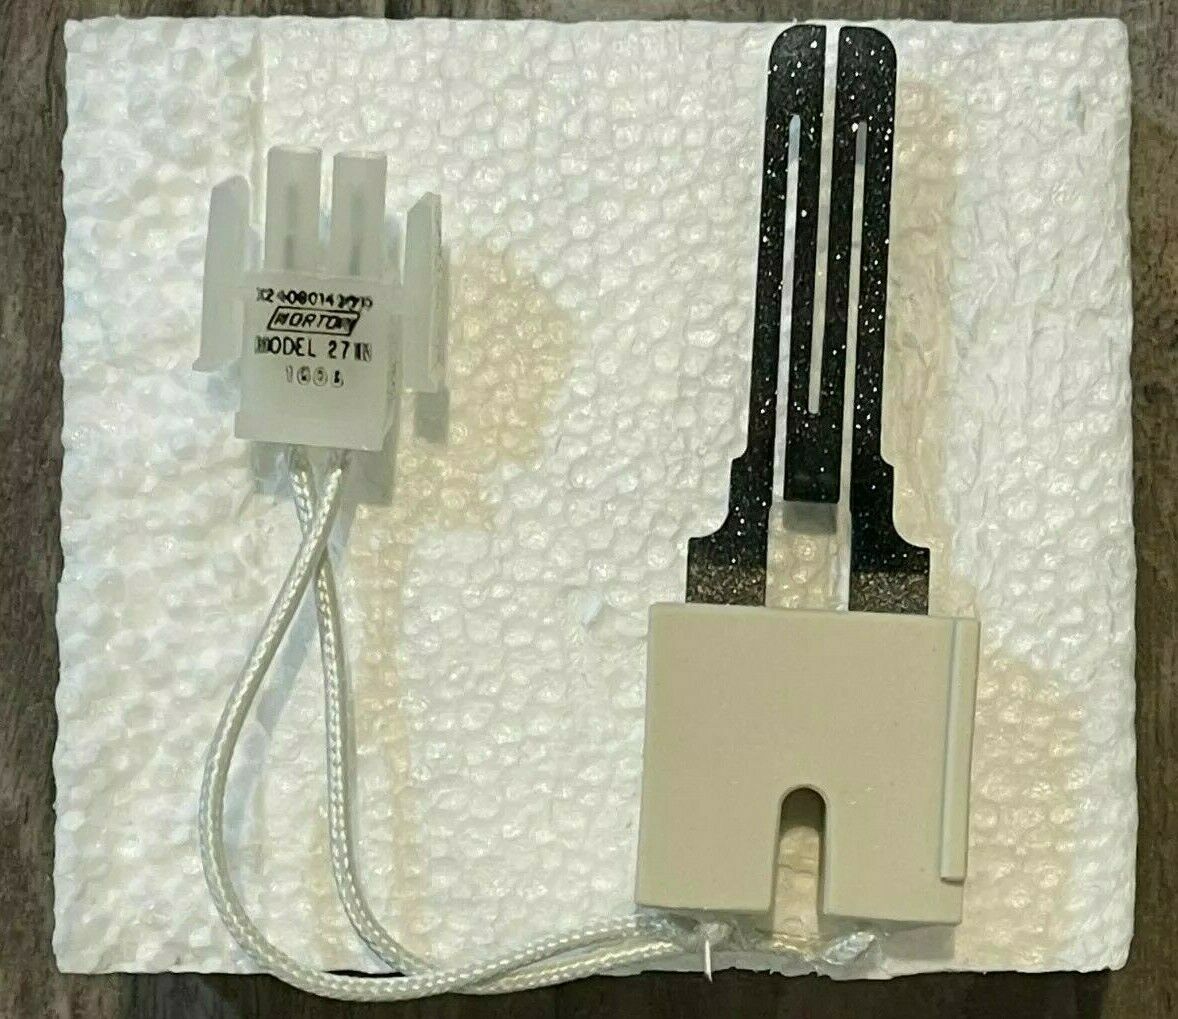 Service First Ign00054 Hot Surface Ignitor 120v 3.5 Amp